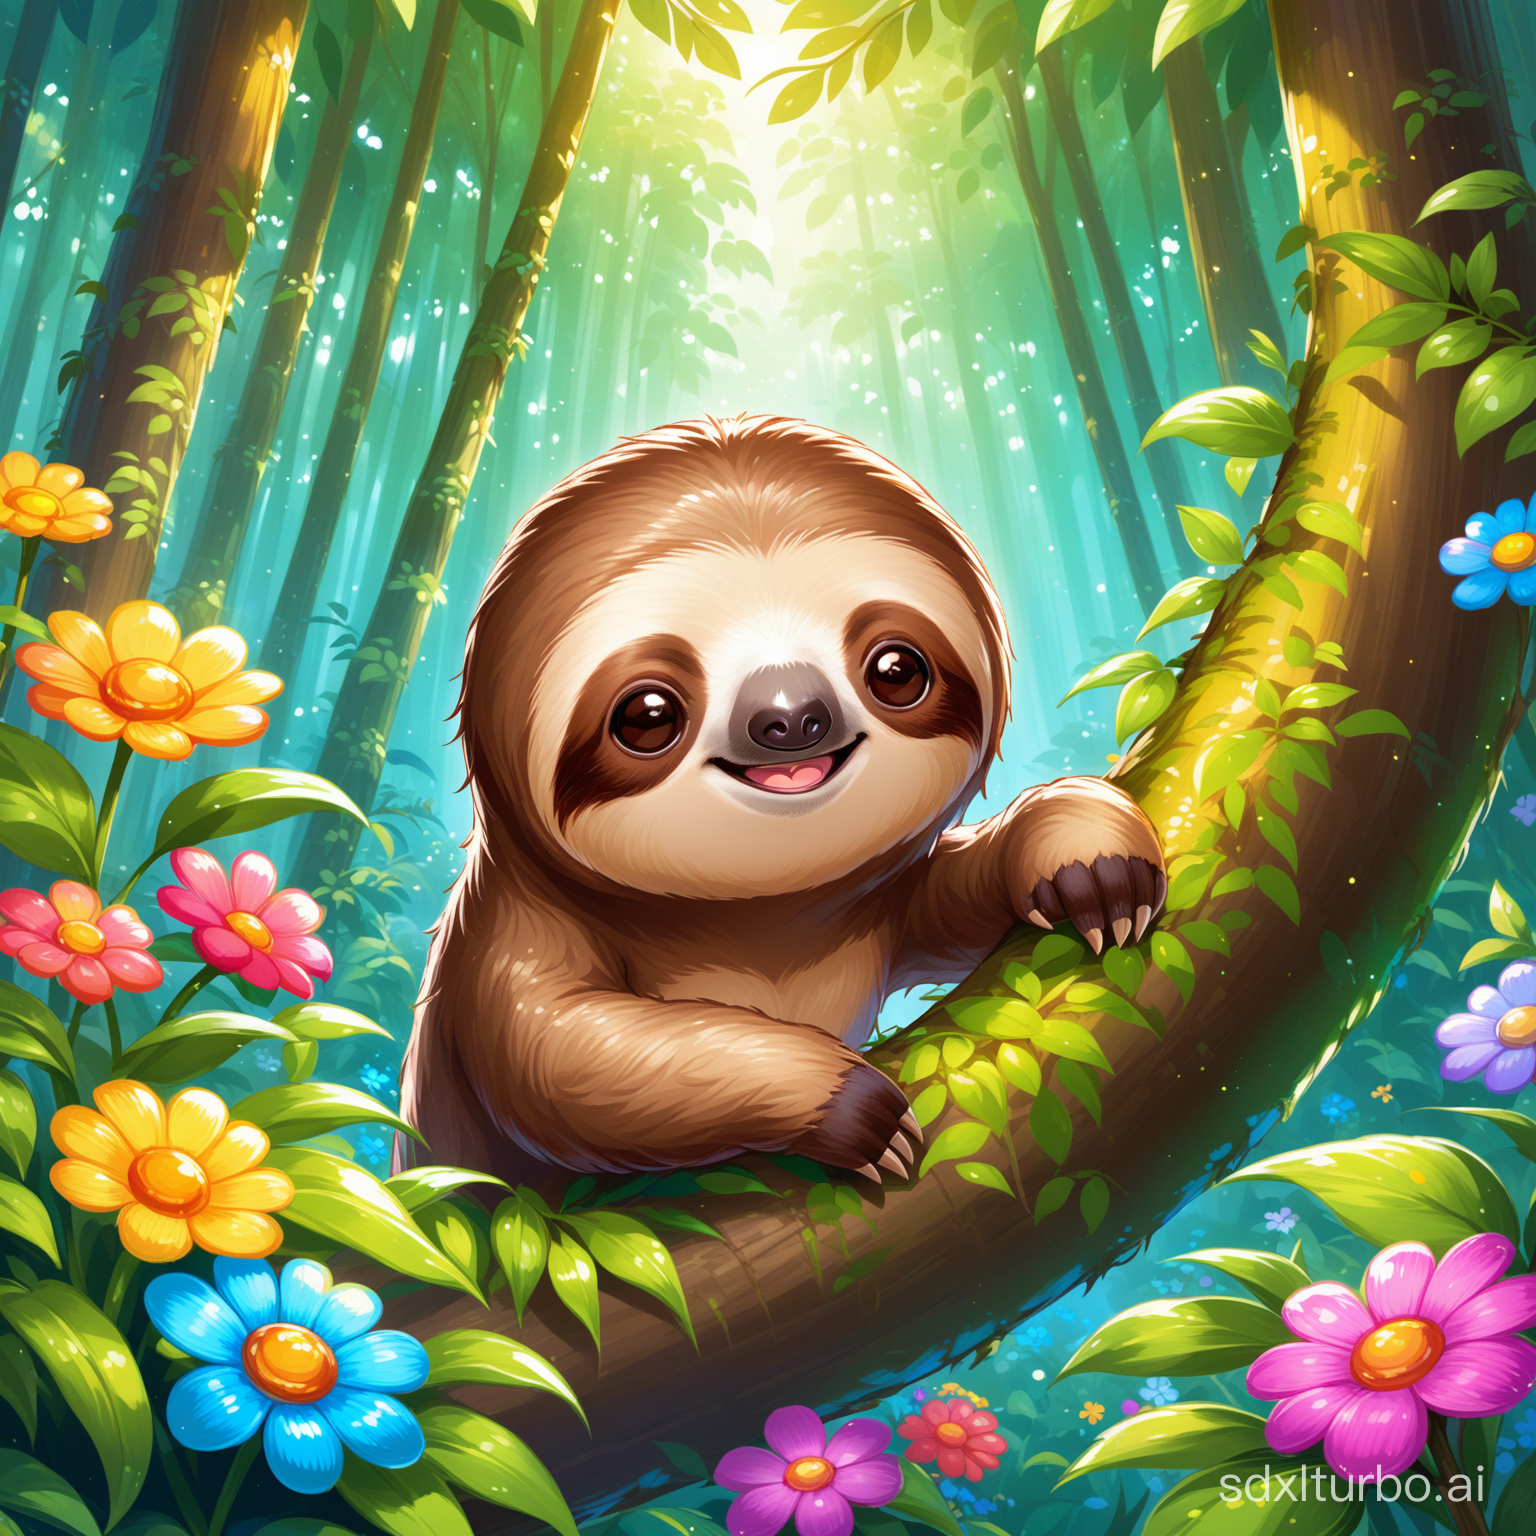 a cartoon sloth portrait, flowers around, in forest, children painting, cg, fantasy, painting